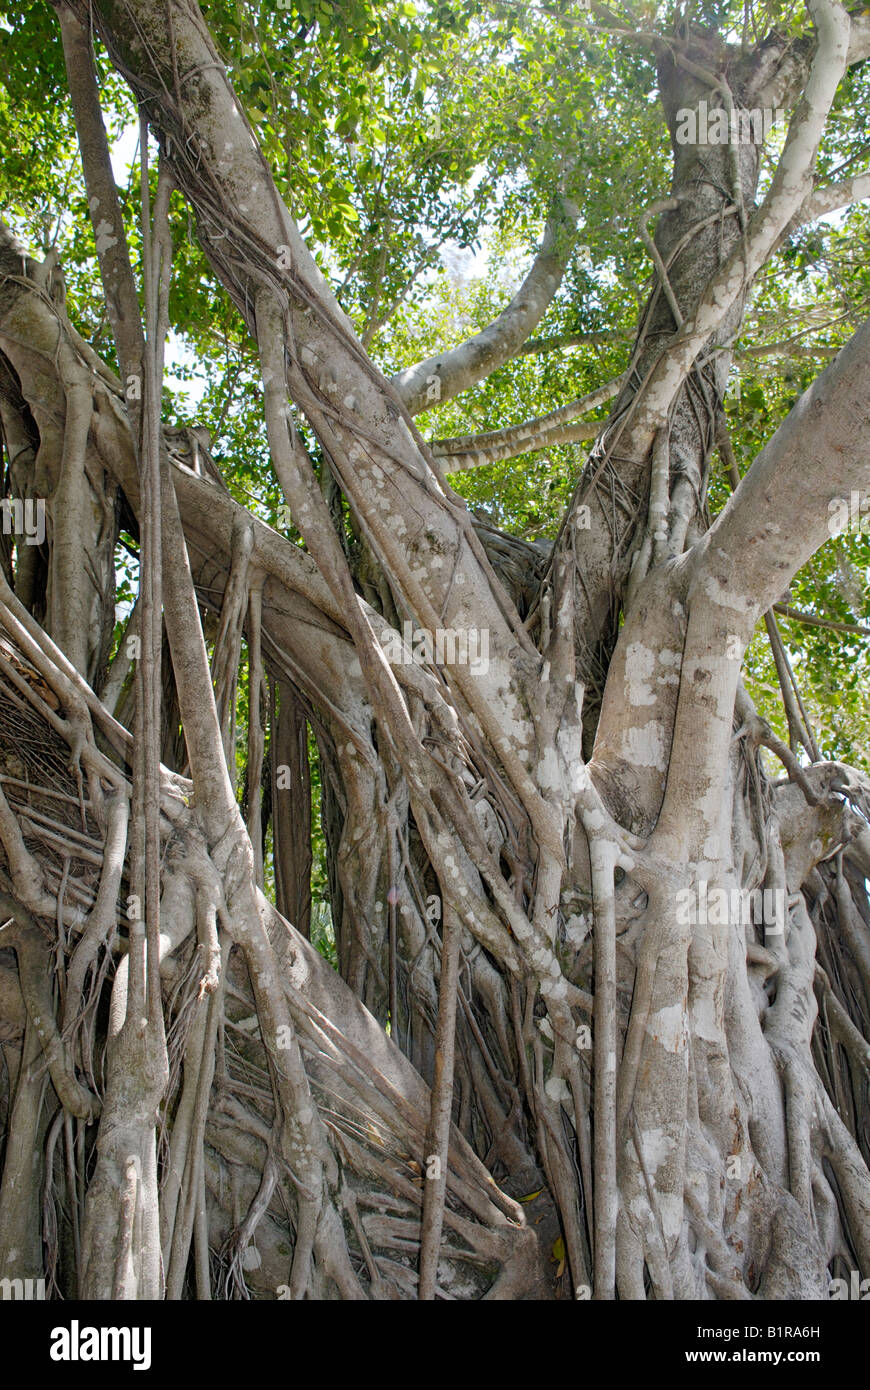 An old strangler fig Ficus aurea The original host tree within the parasitic strangler is not even visible anymore Stock Photo